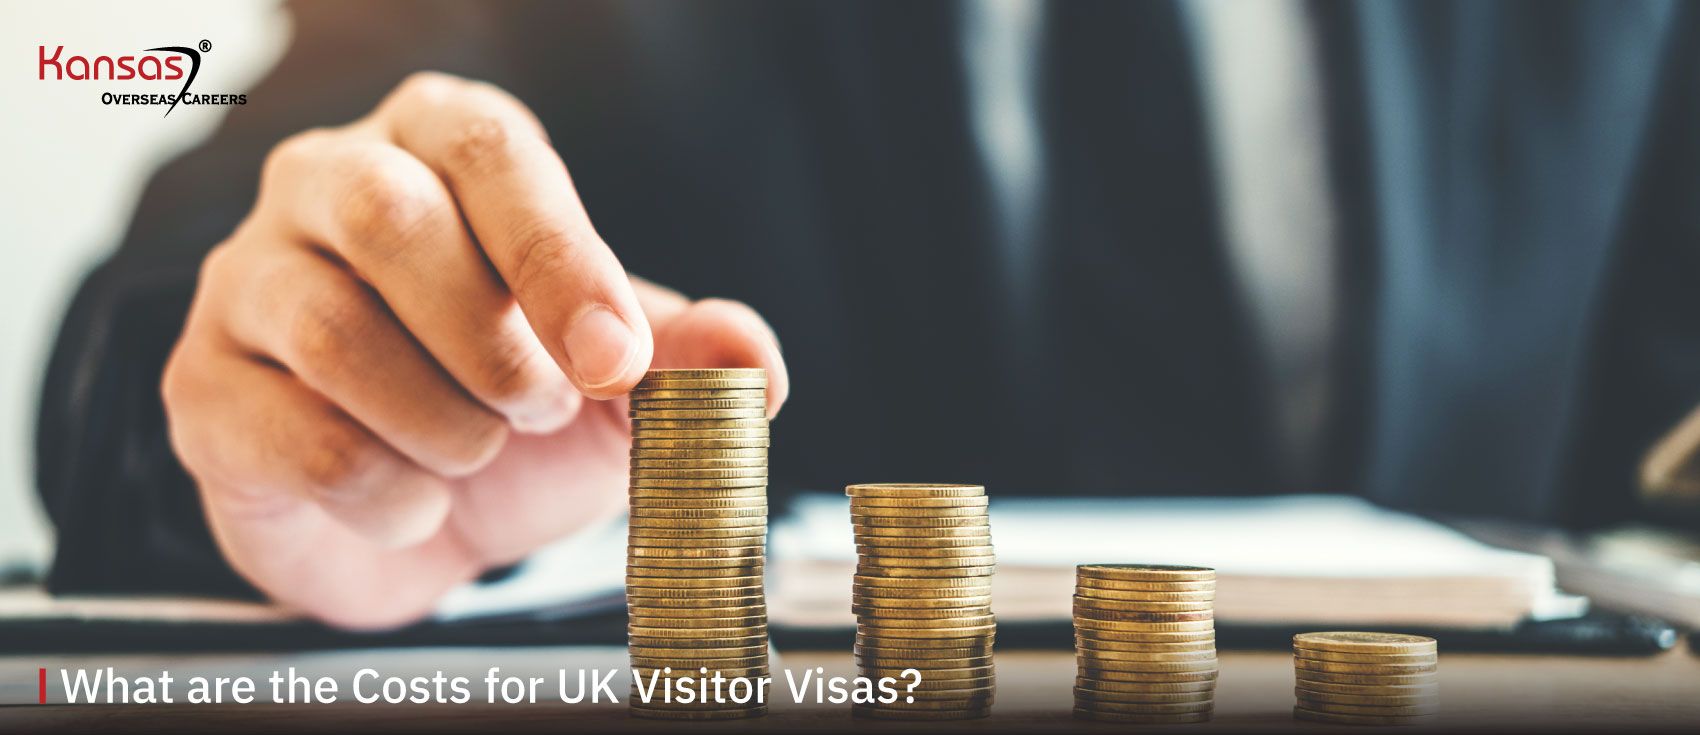 What-are-the-Costs-for-UK-Visitor-Visas-